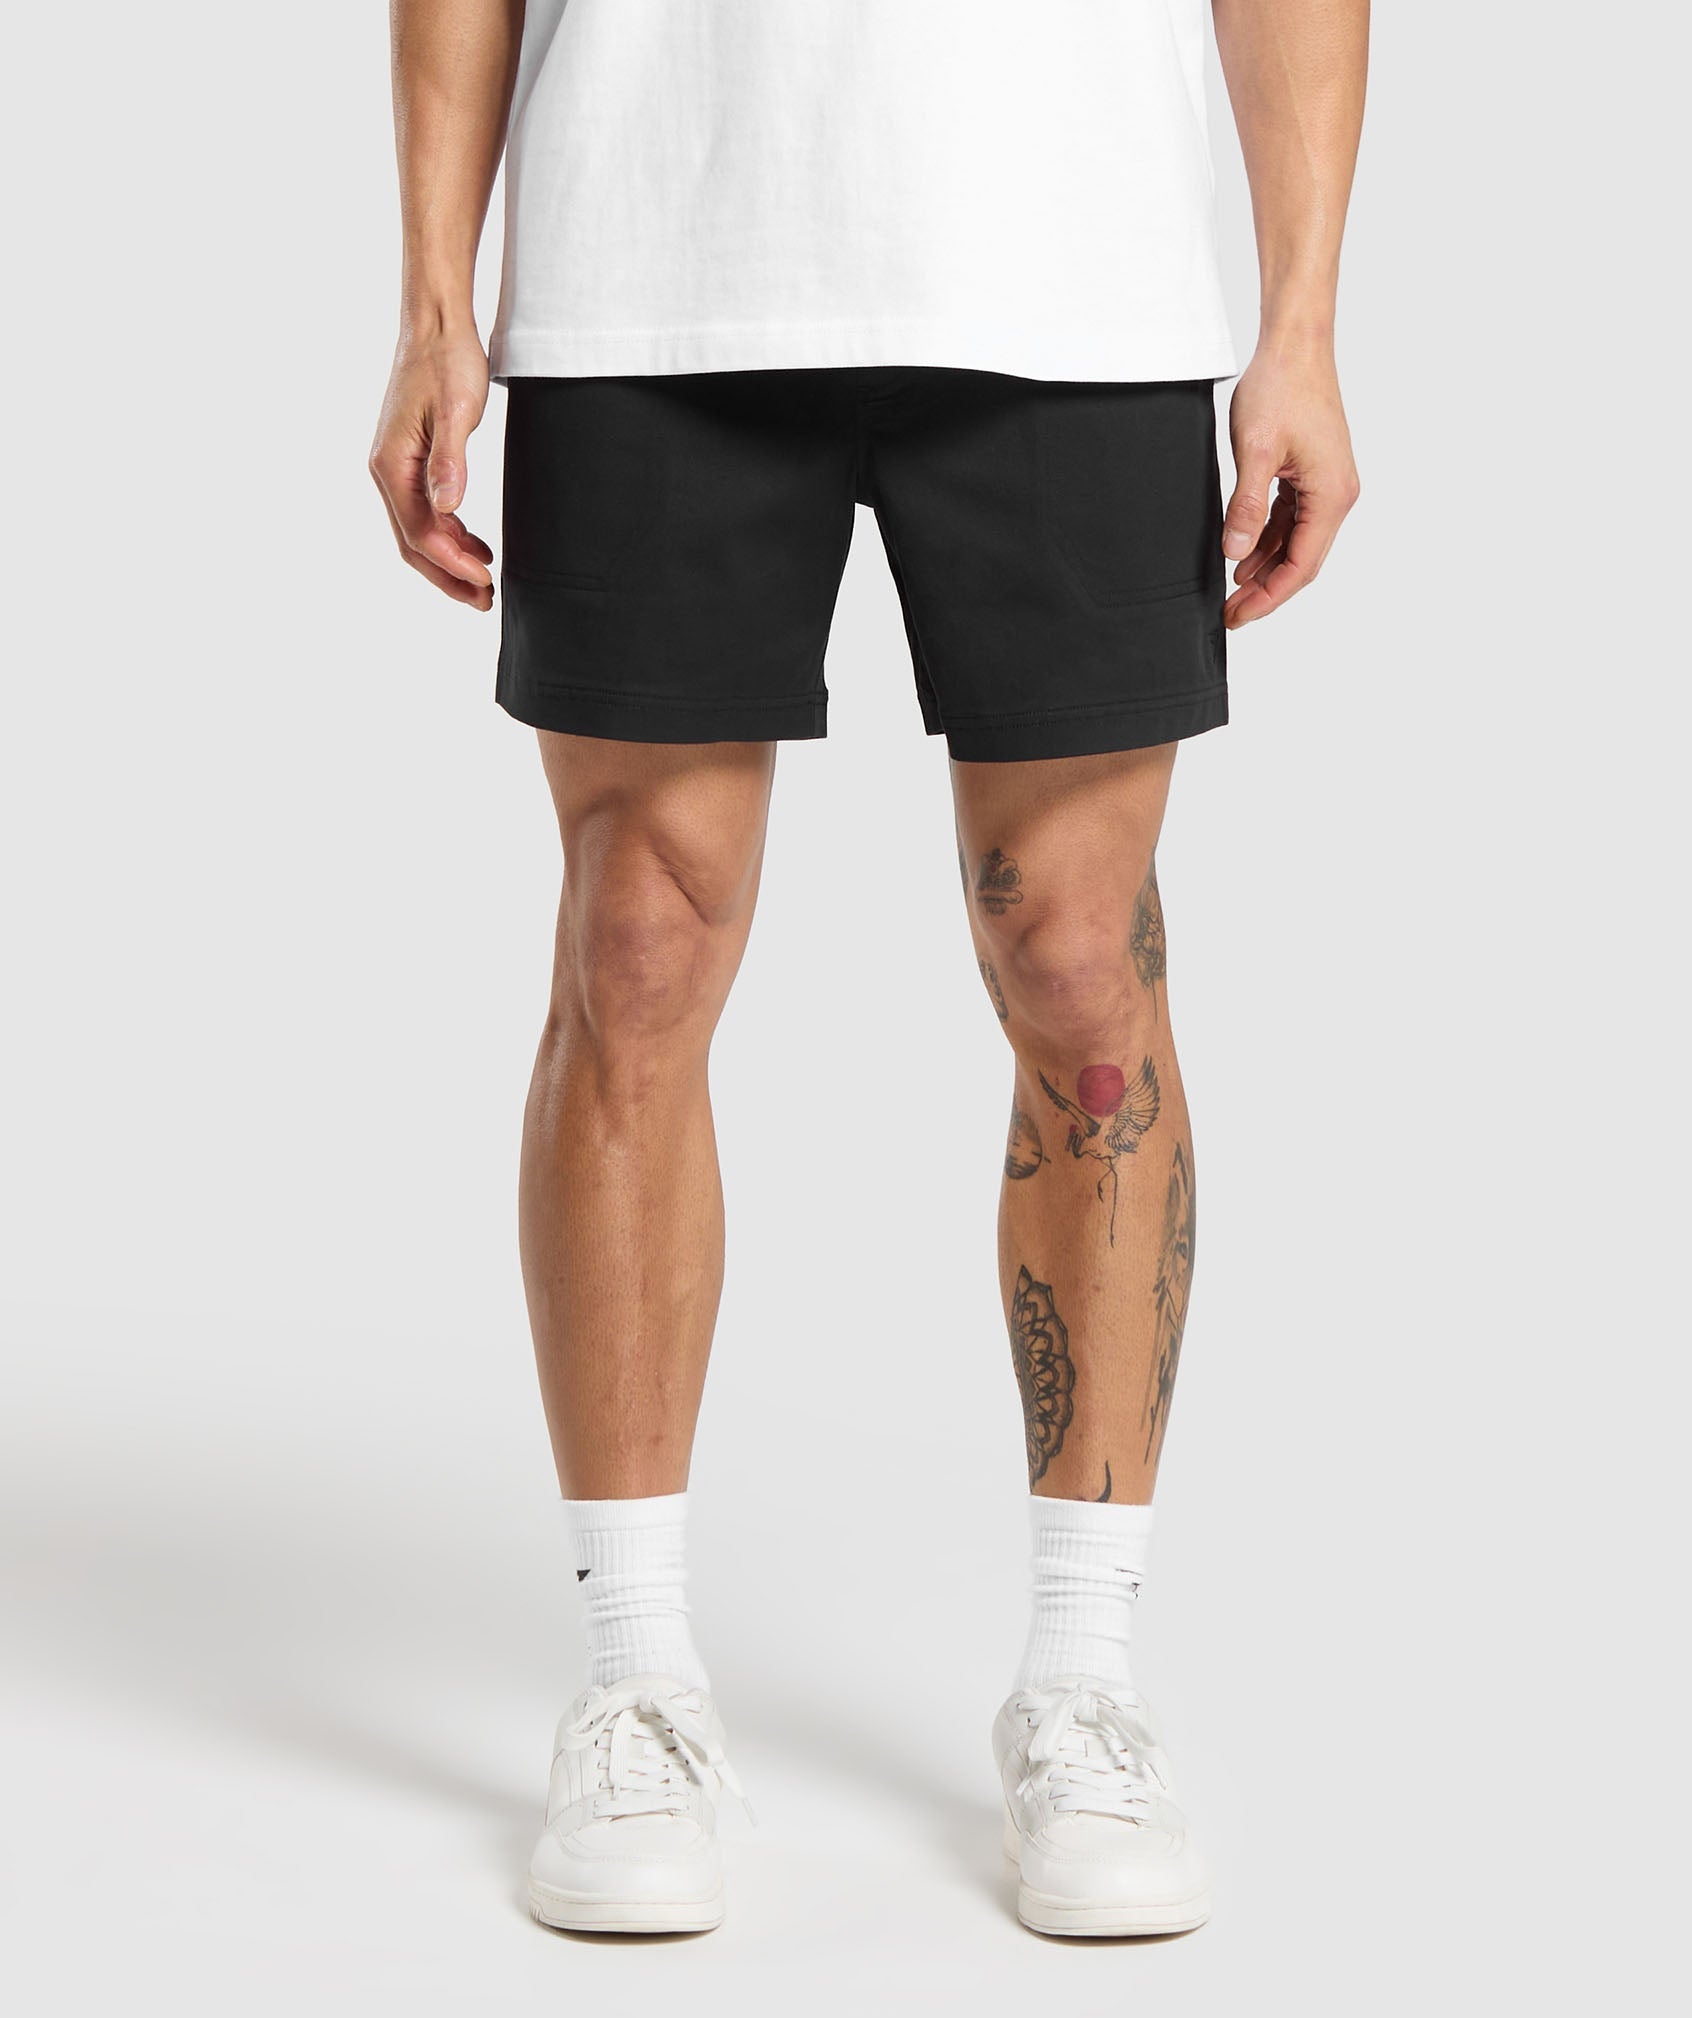 Rest Day Woven Shorts in Black